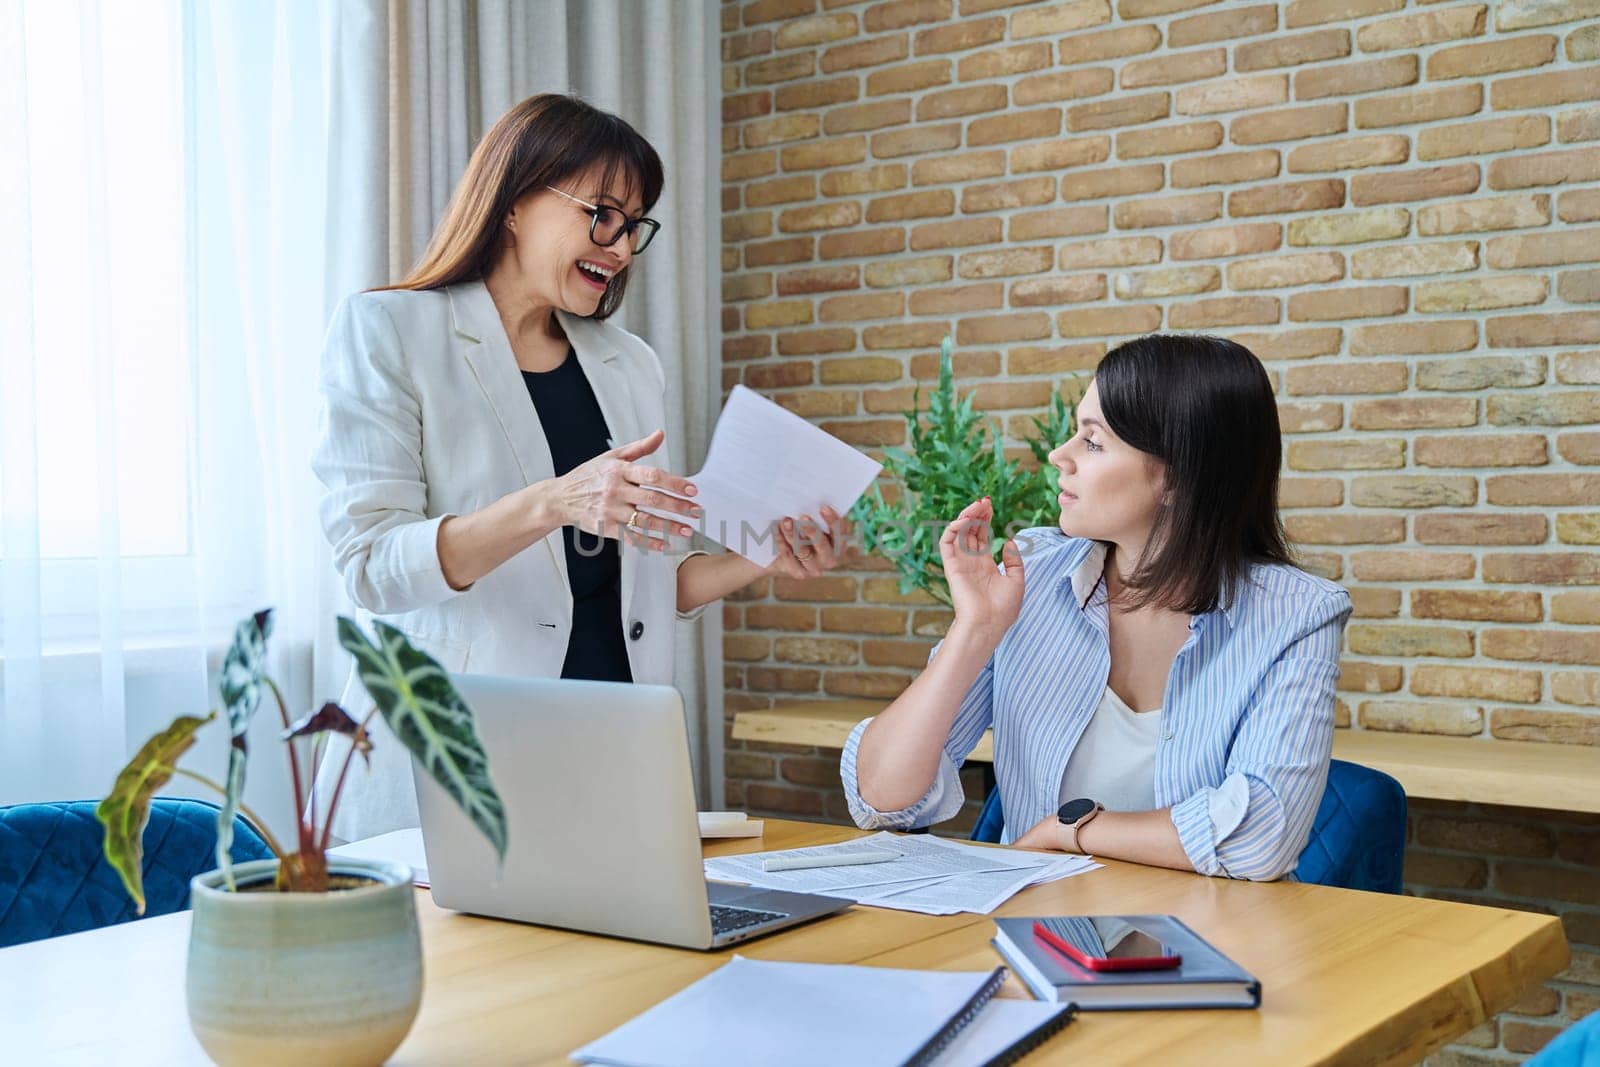 Two joyful happy smiling business women colleagues sitting at large table in office with business papers contracts. Business ceo work law finance mentoring consulting teamwork people job concept